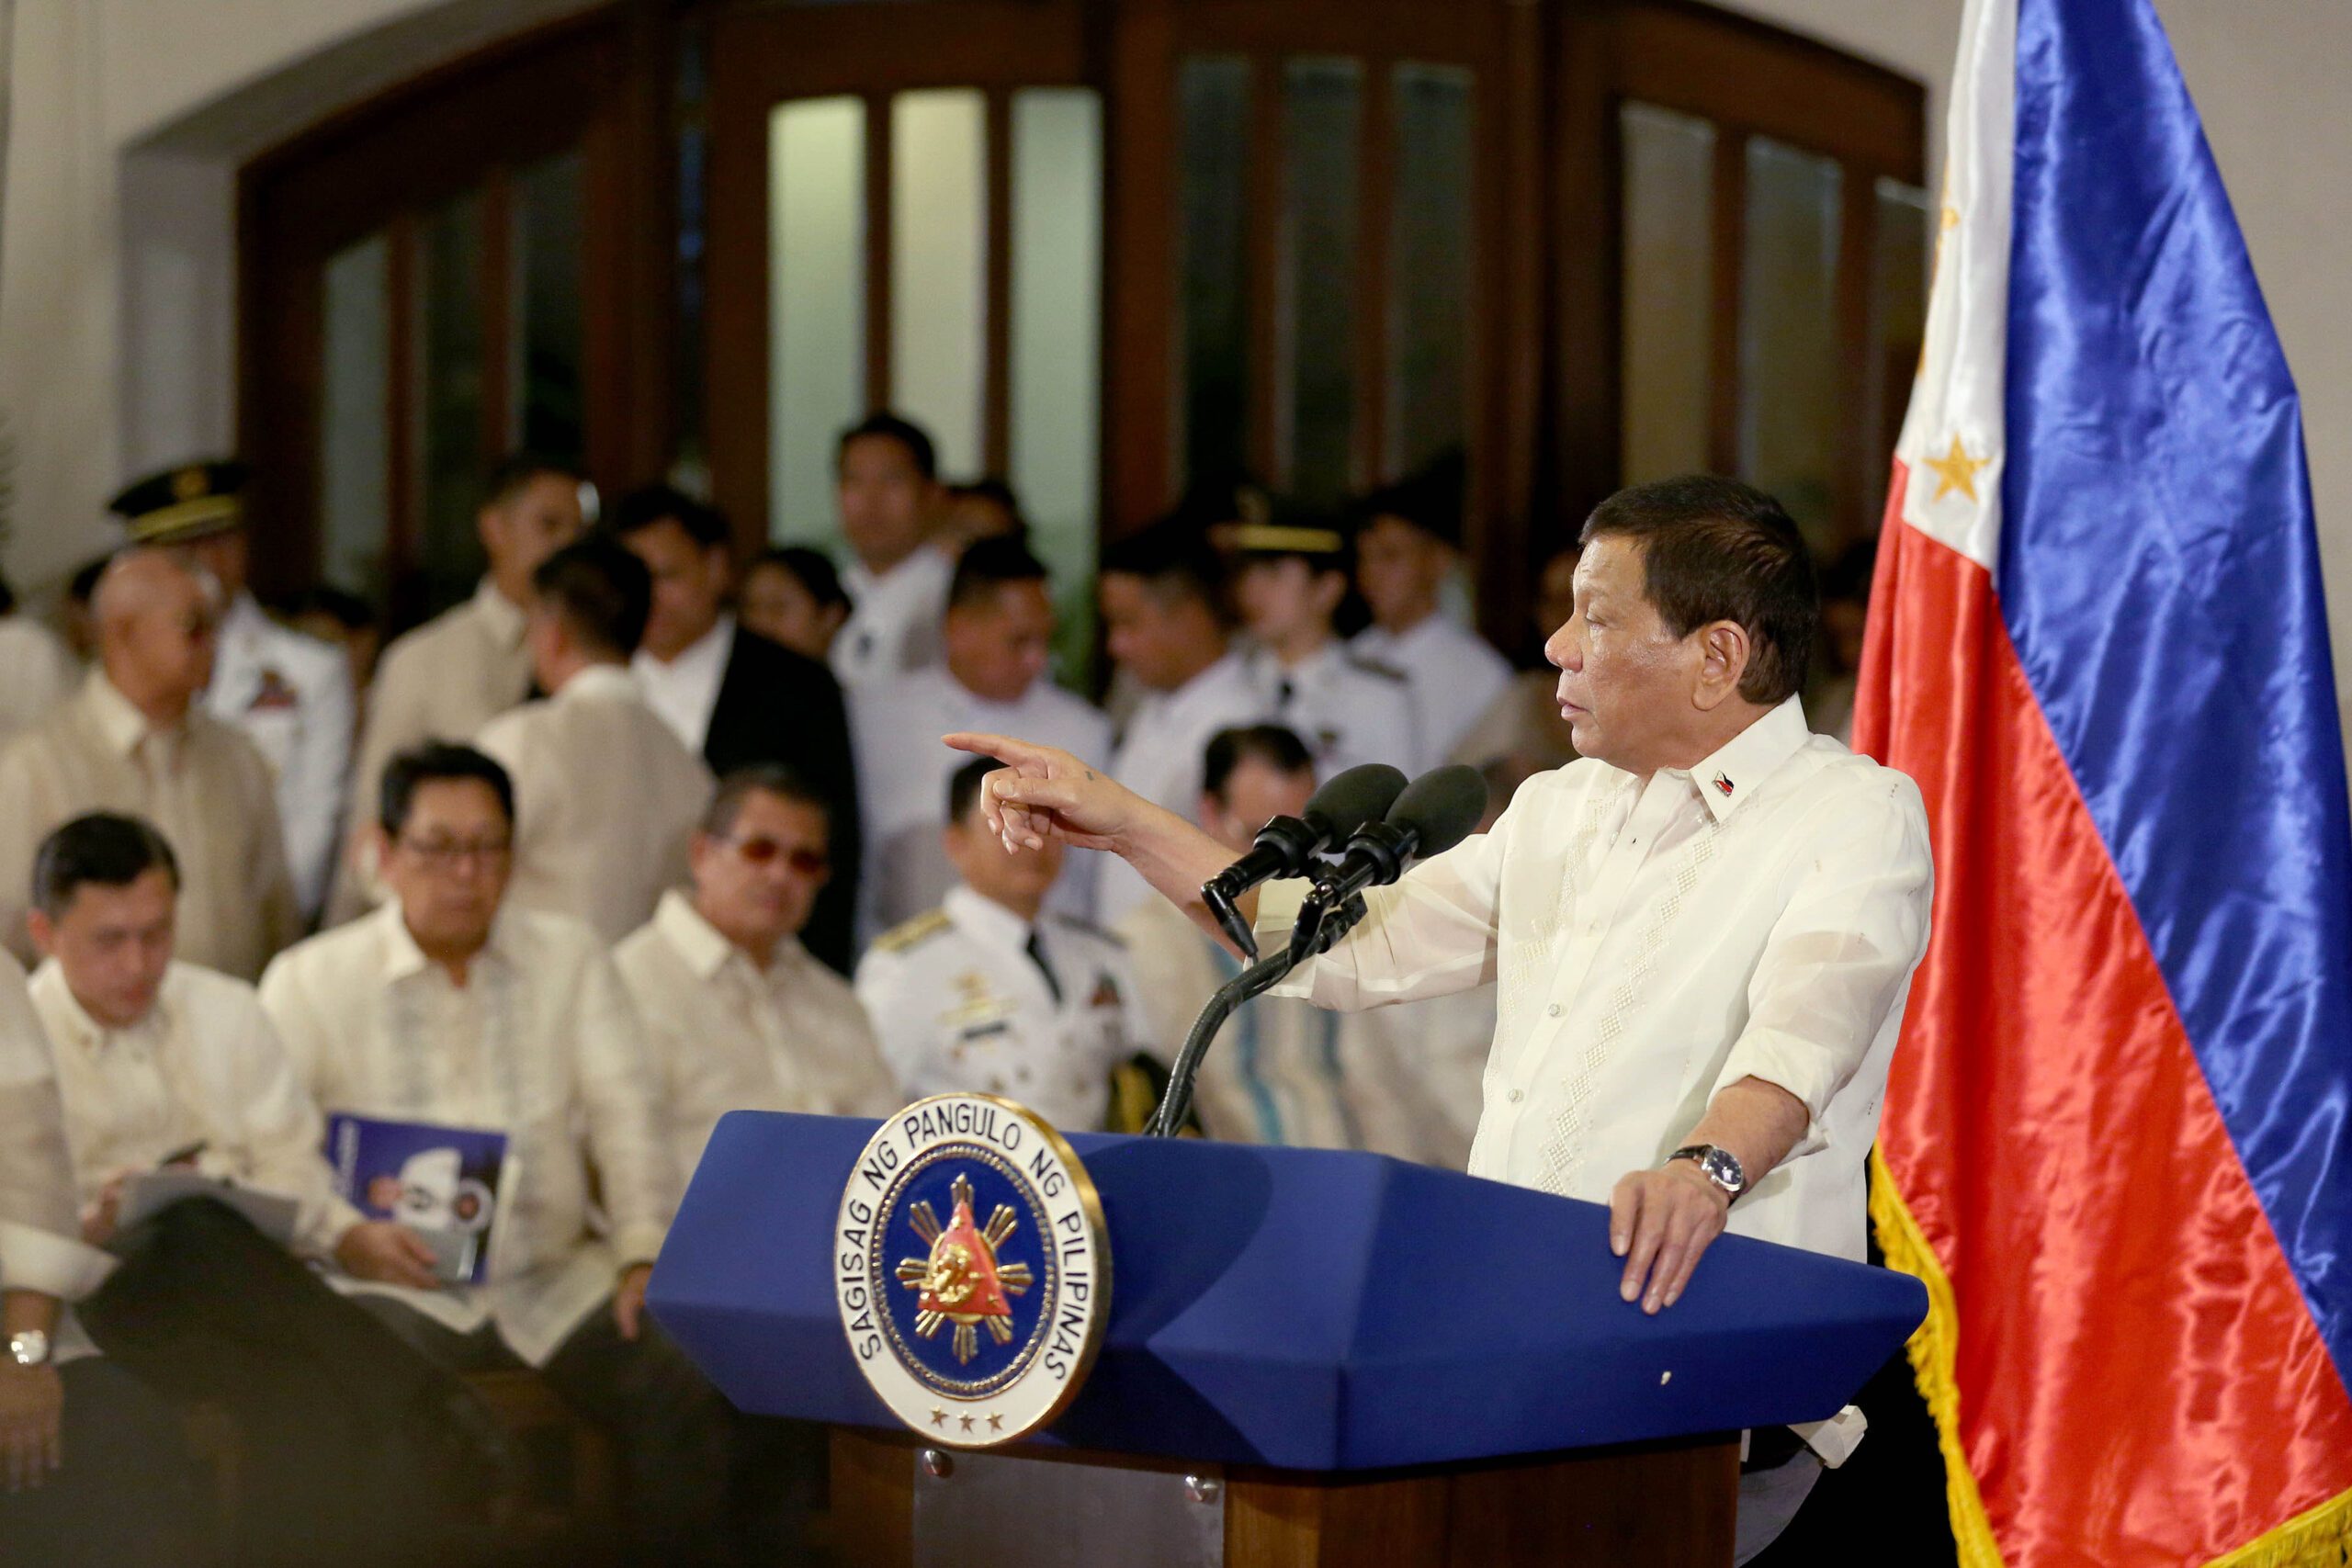 Malacañang: No need for Duterte approval to probe cops, soldiers